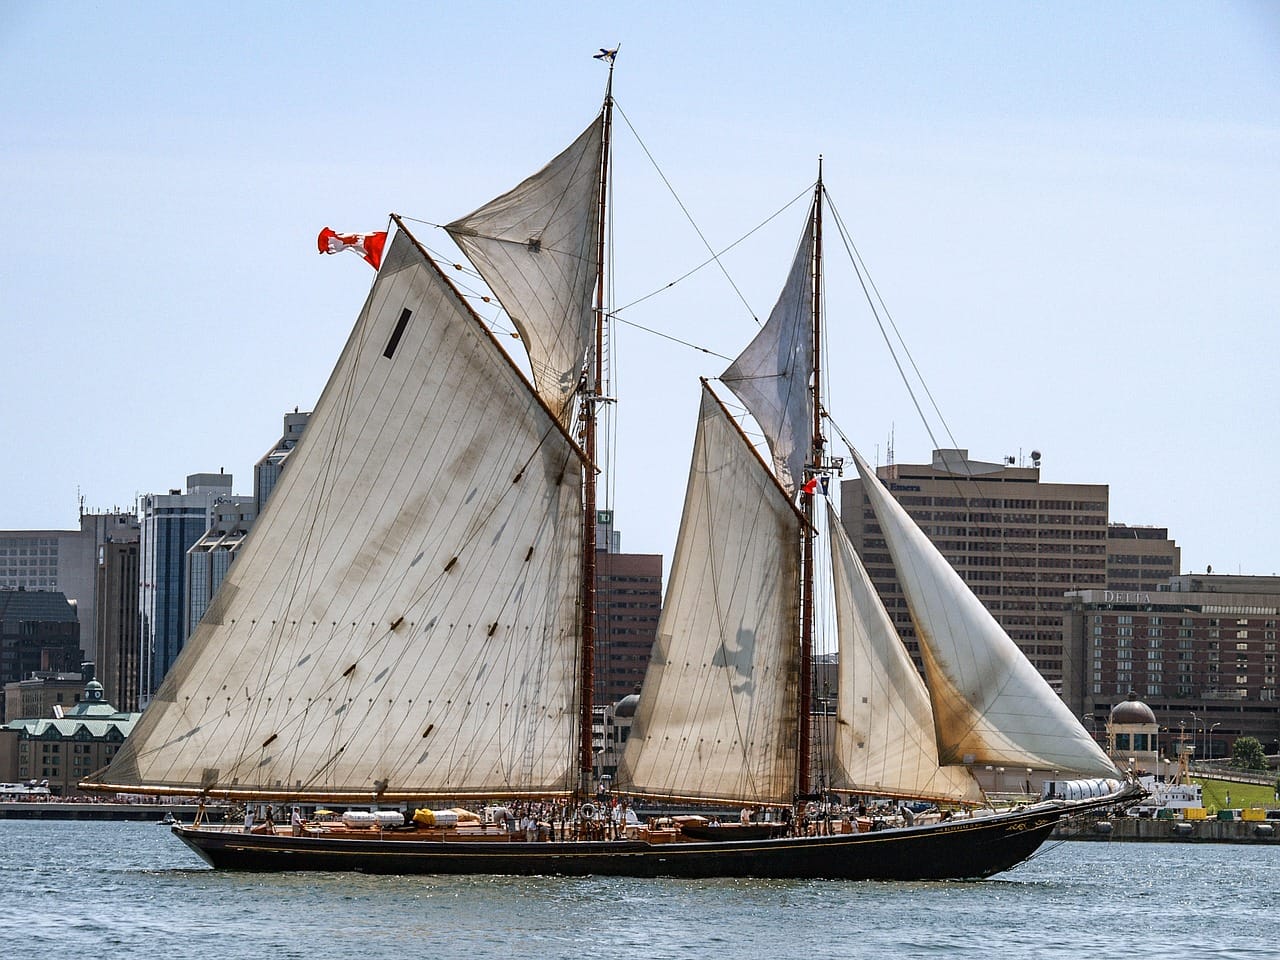 The Bluenose II sails past the Halifax harbourfront